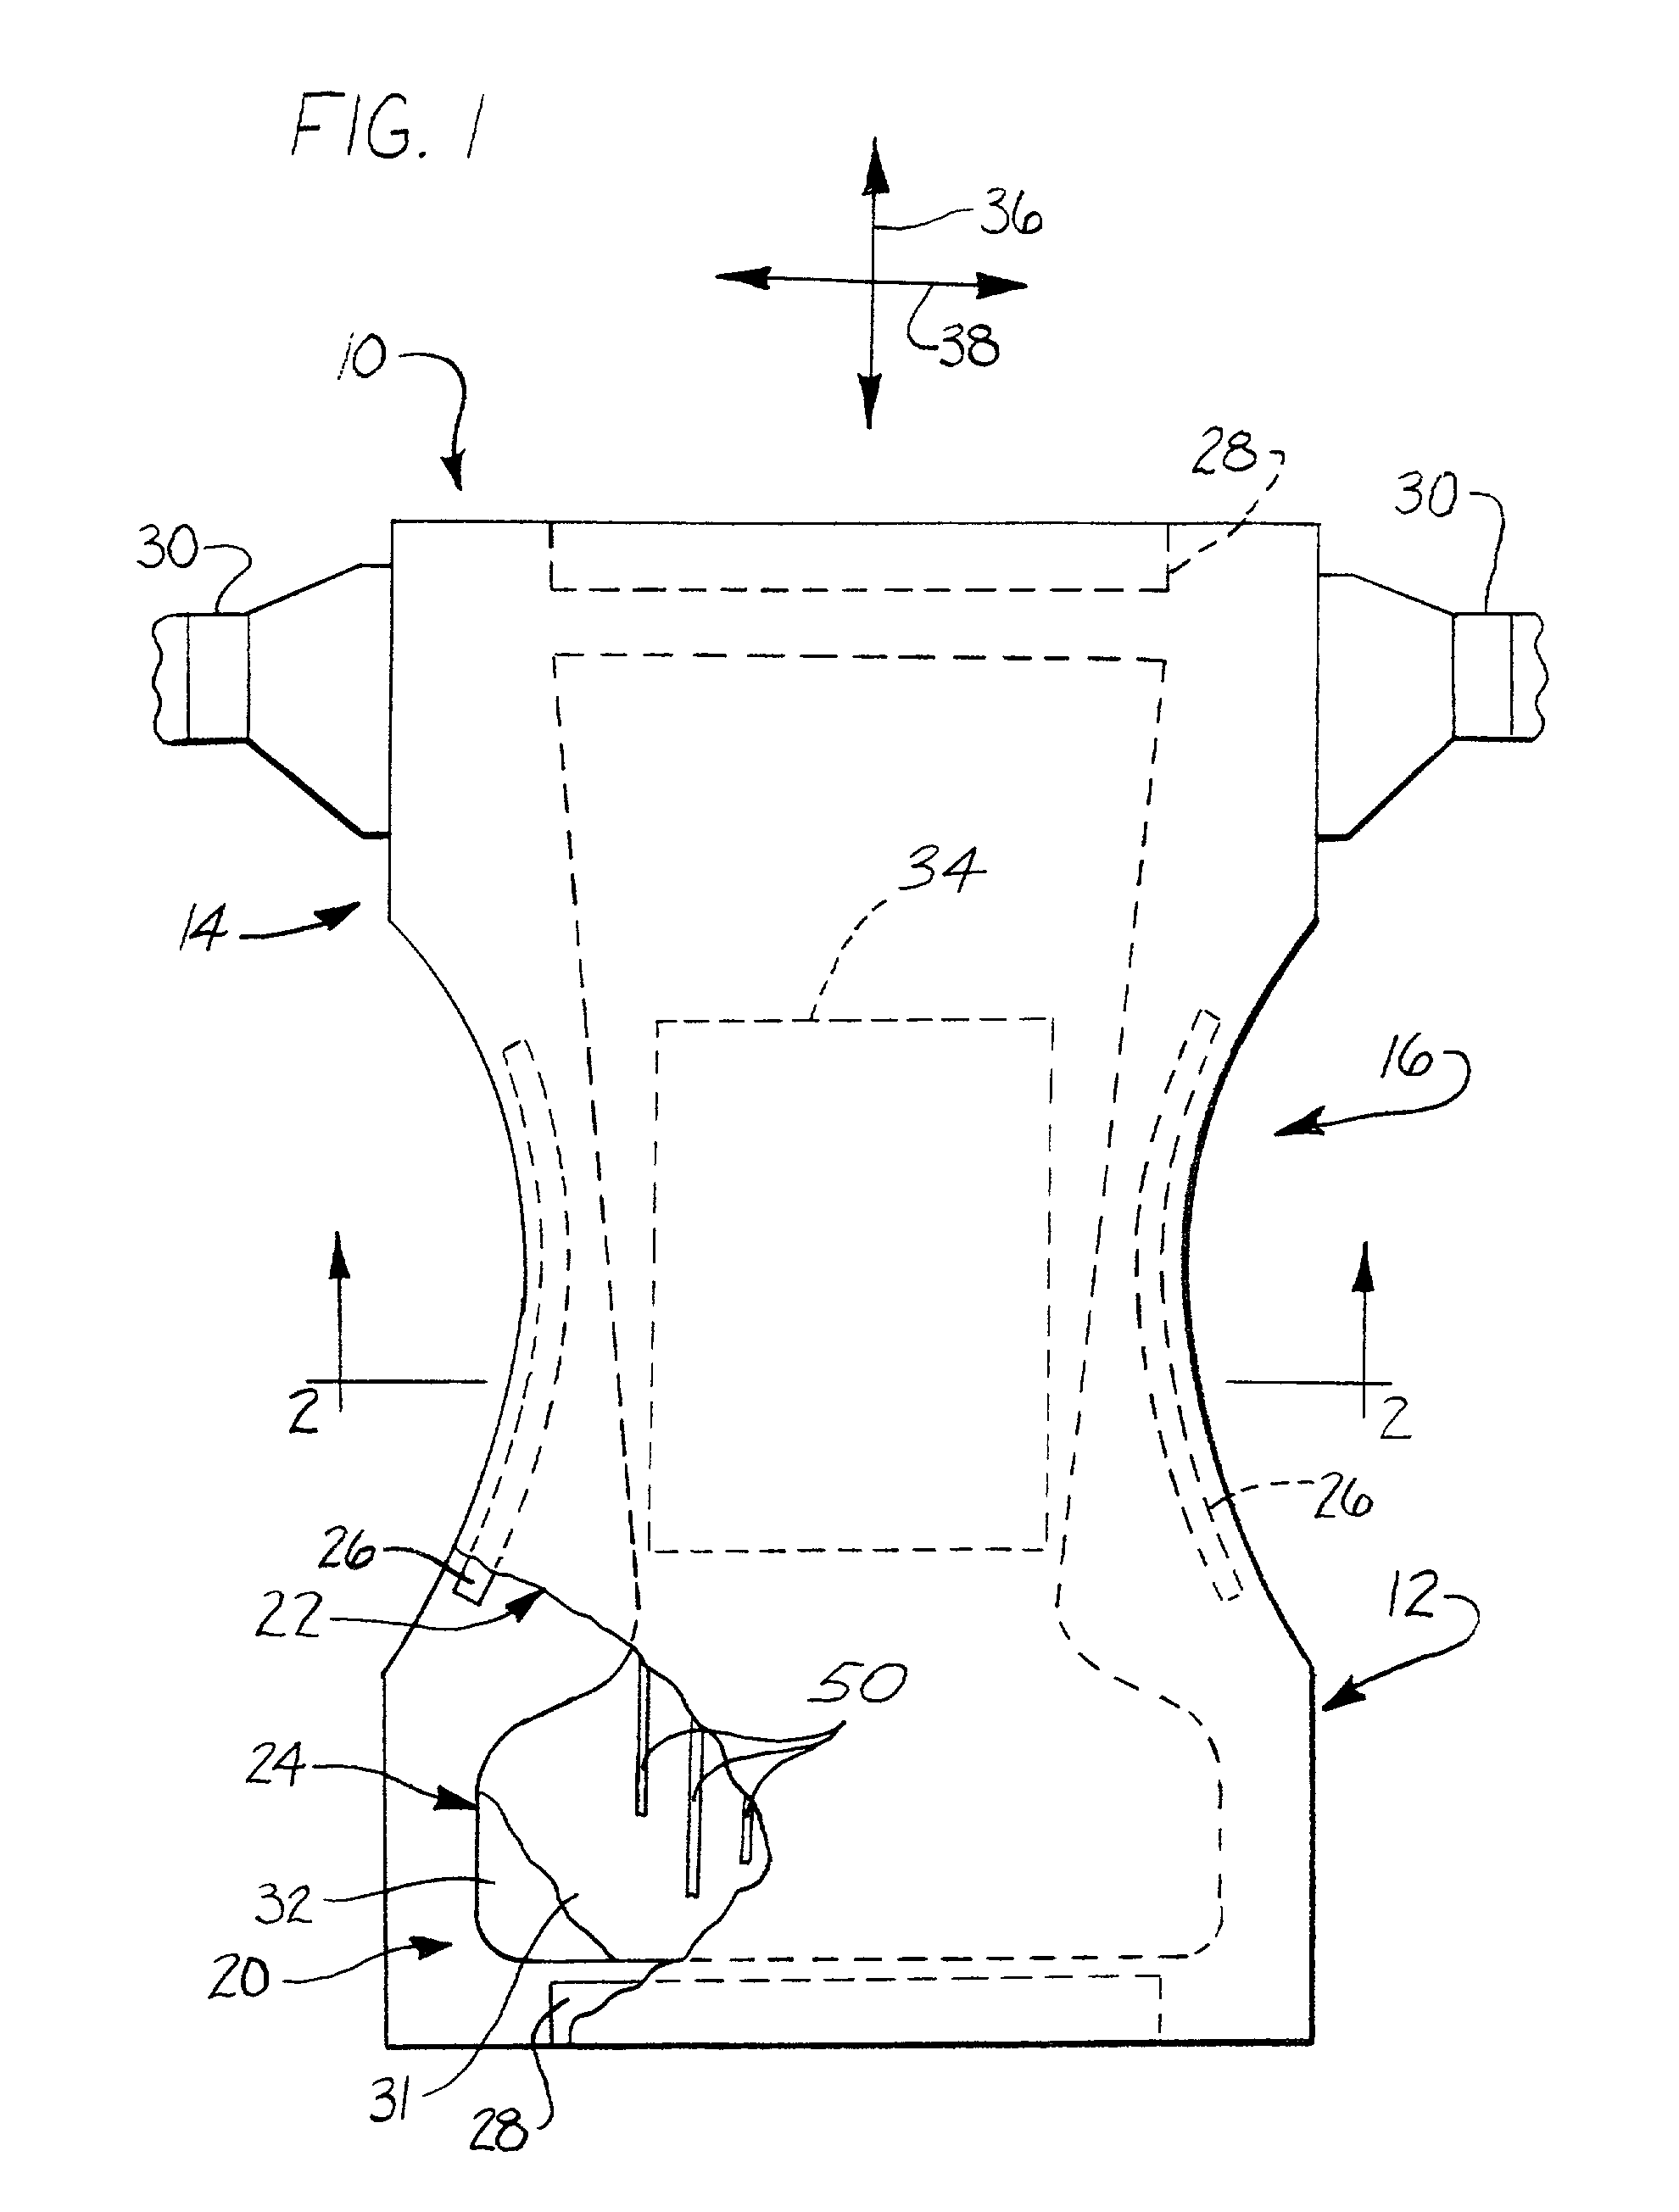 Absorbent articles with absorbent pad gapping